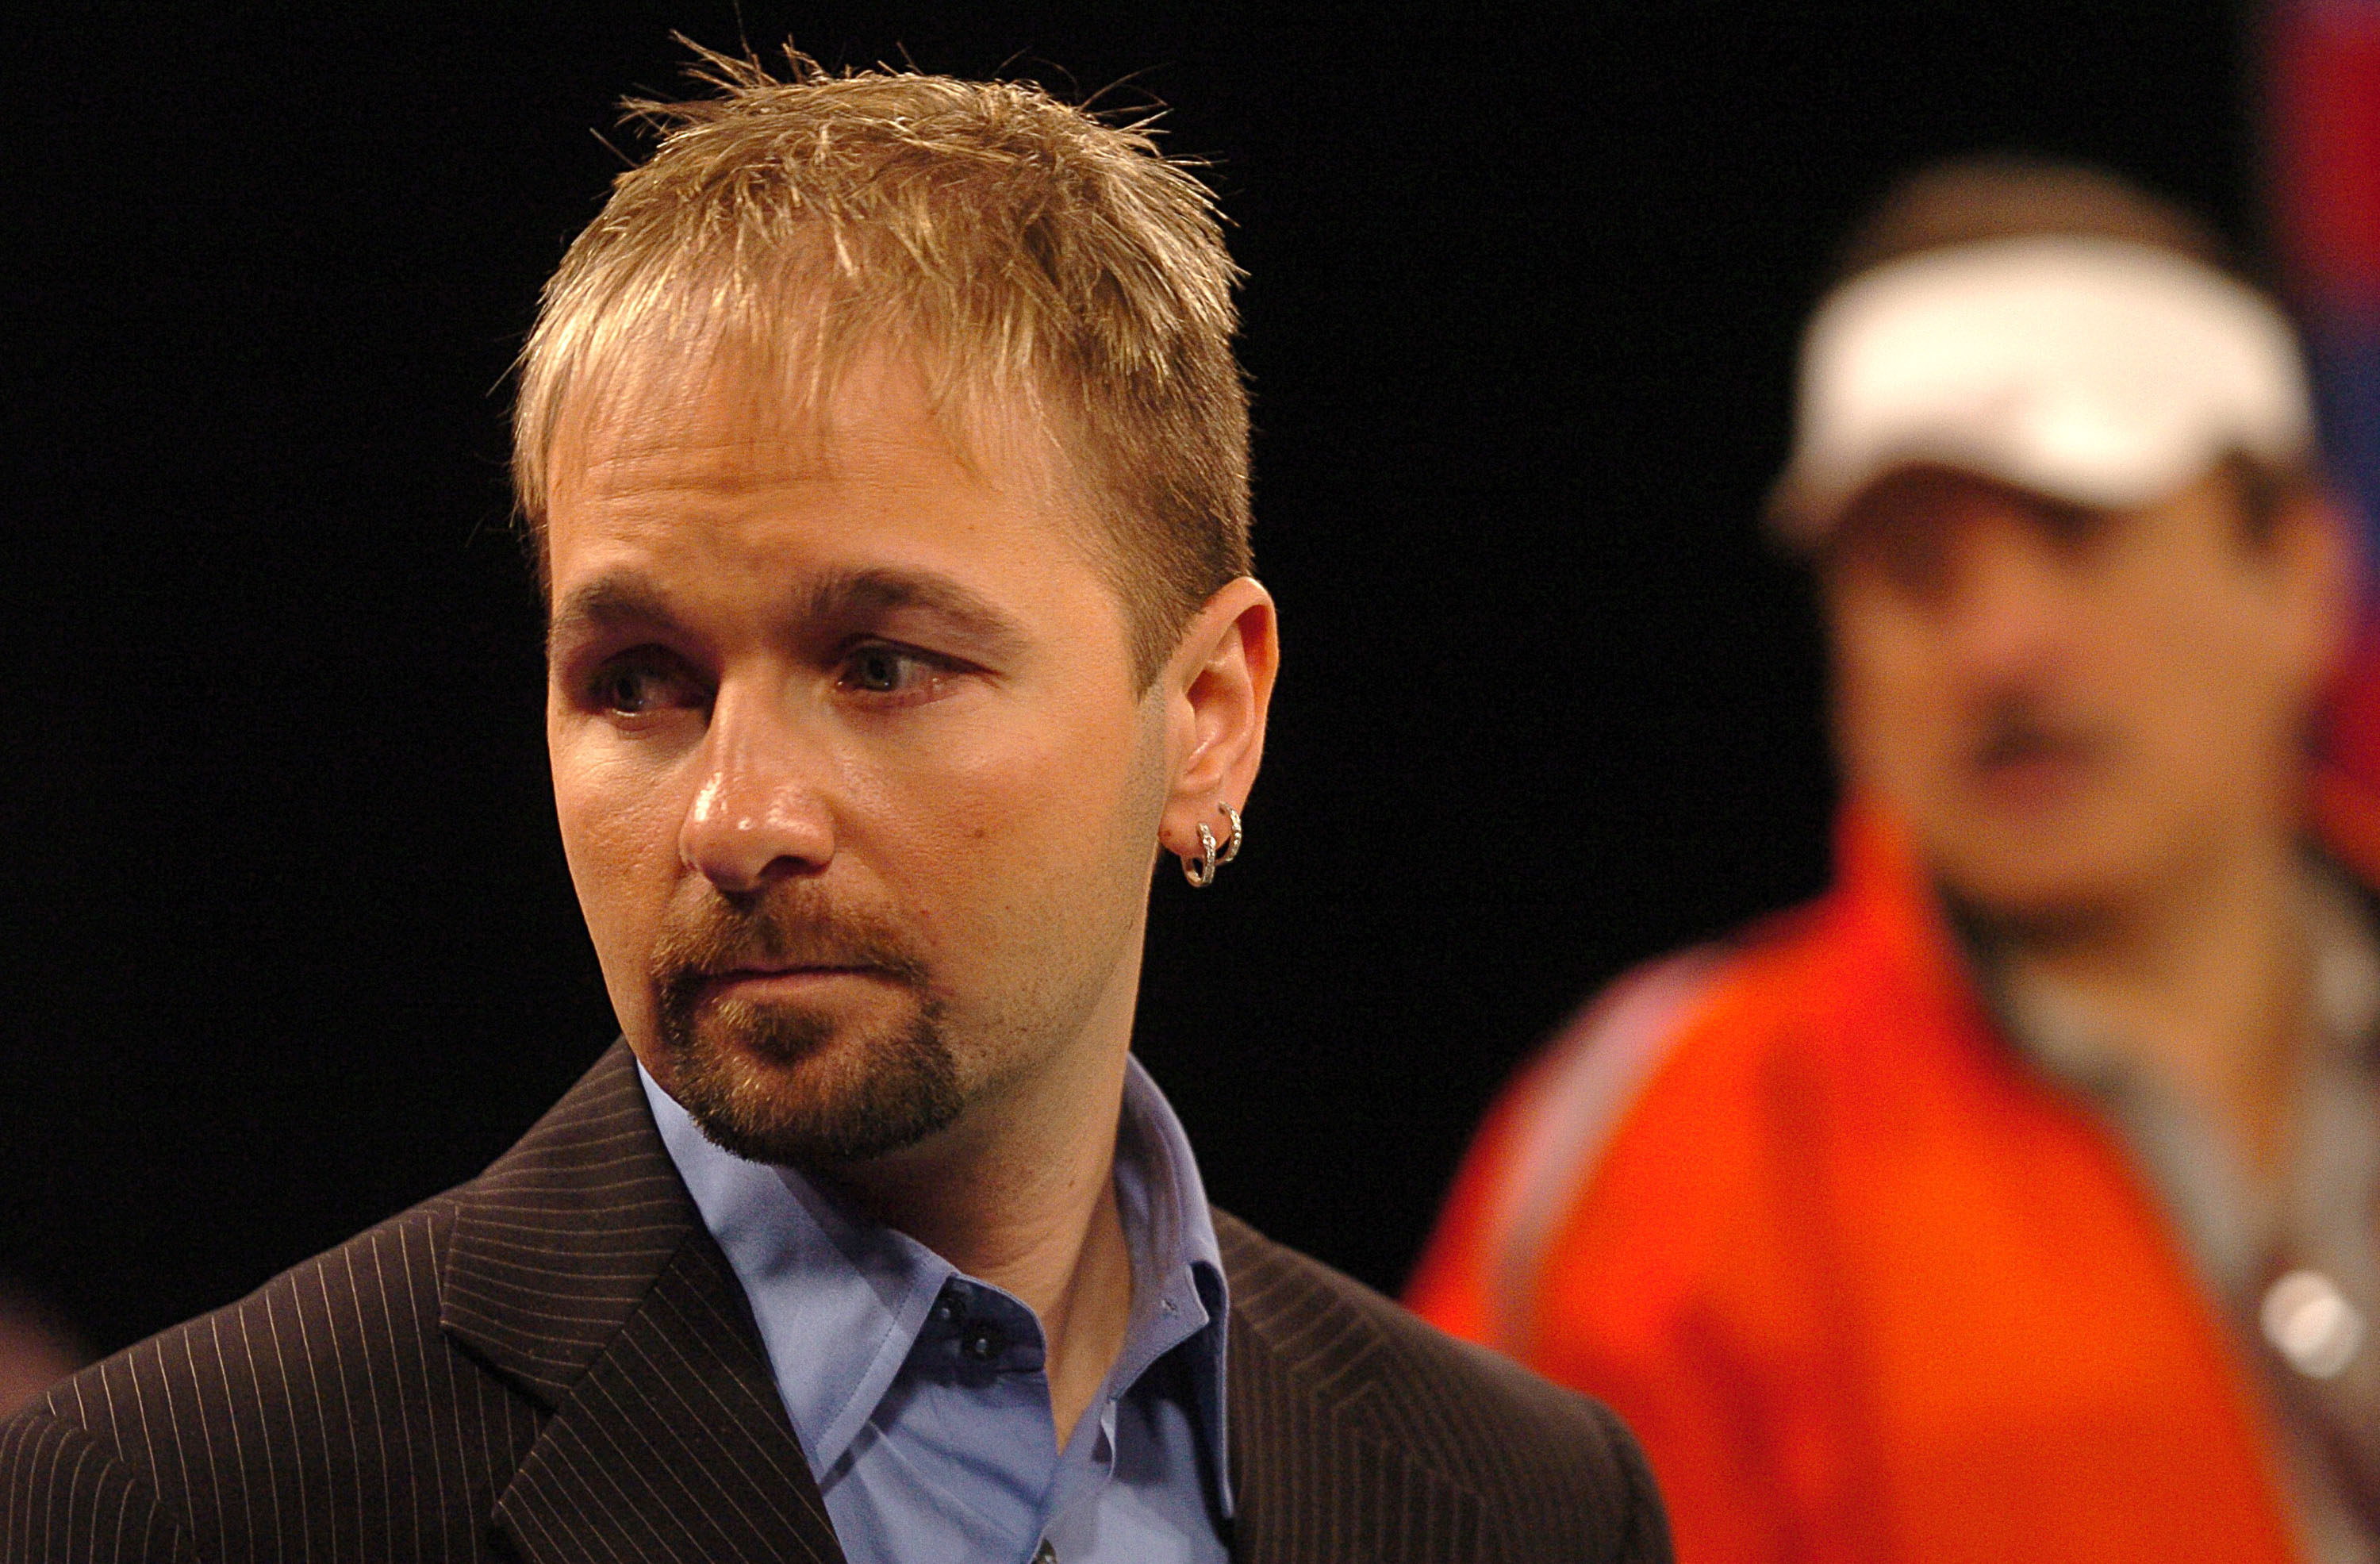 Daniel Negreanu takes part in the Final Table of the World Poker Tour's Five Diamond World Poker Classic at Bellagio December 18, 2004. The World Poker Tour is televised on The Travel Channel, Wednesday at 9PM. (Photo by Steve Grayson/Getty Images)